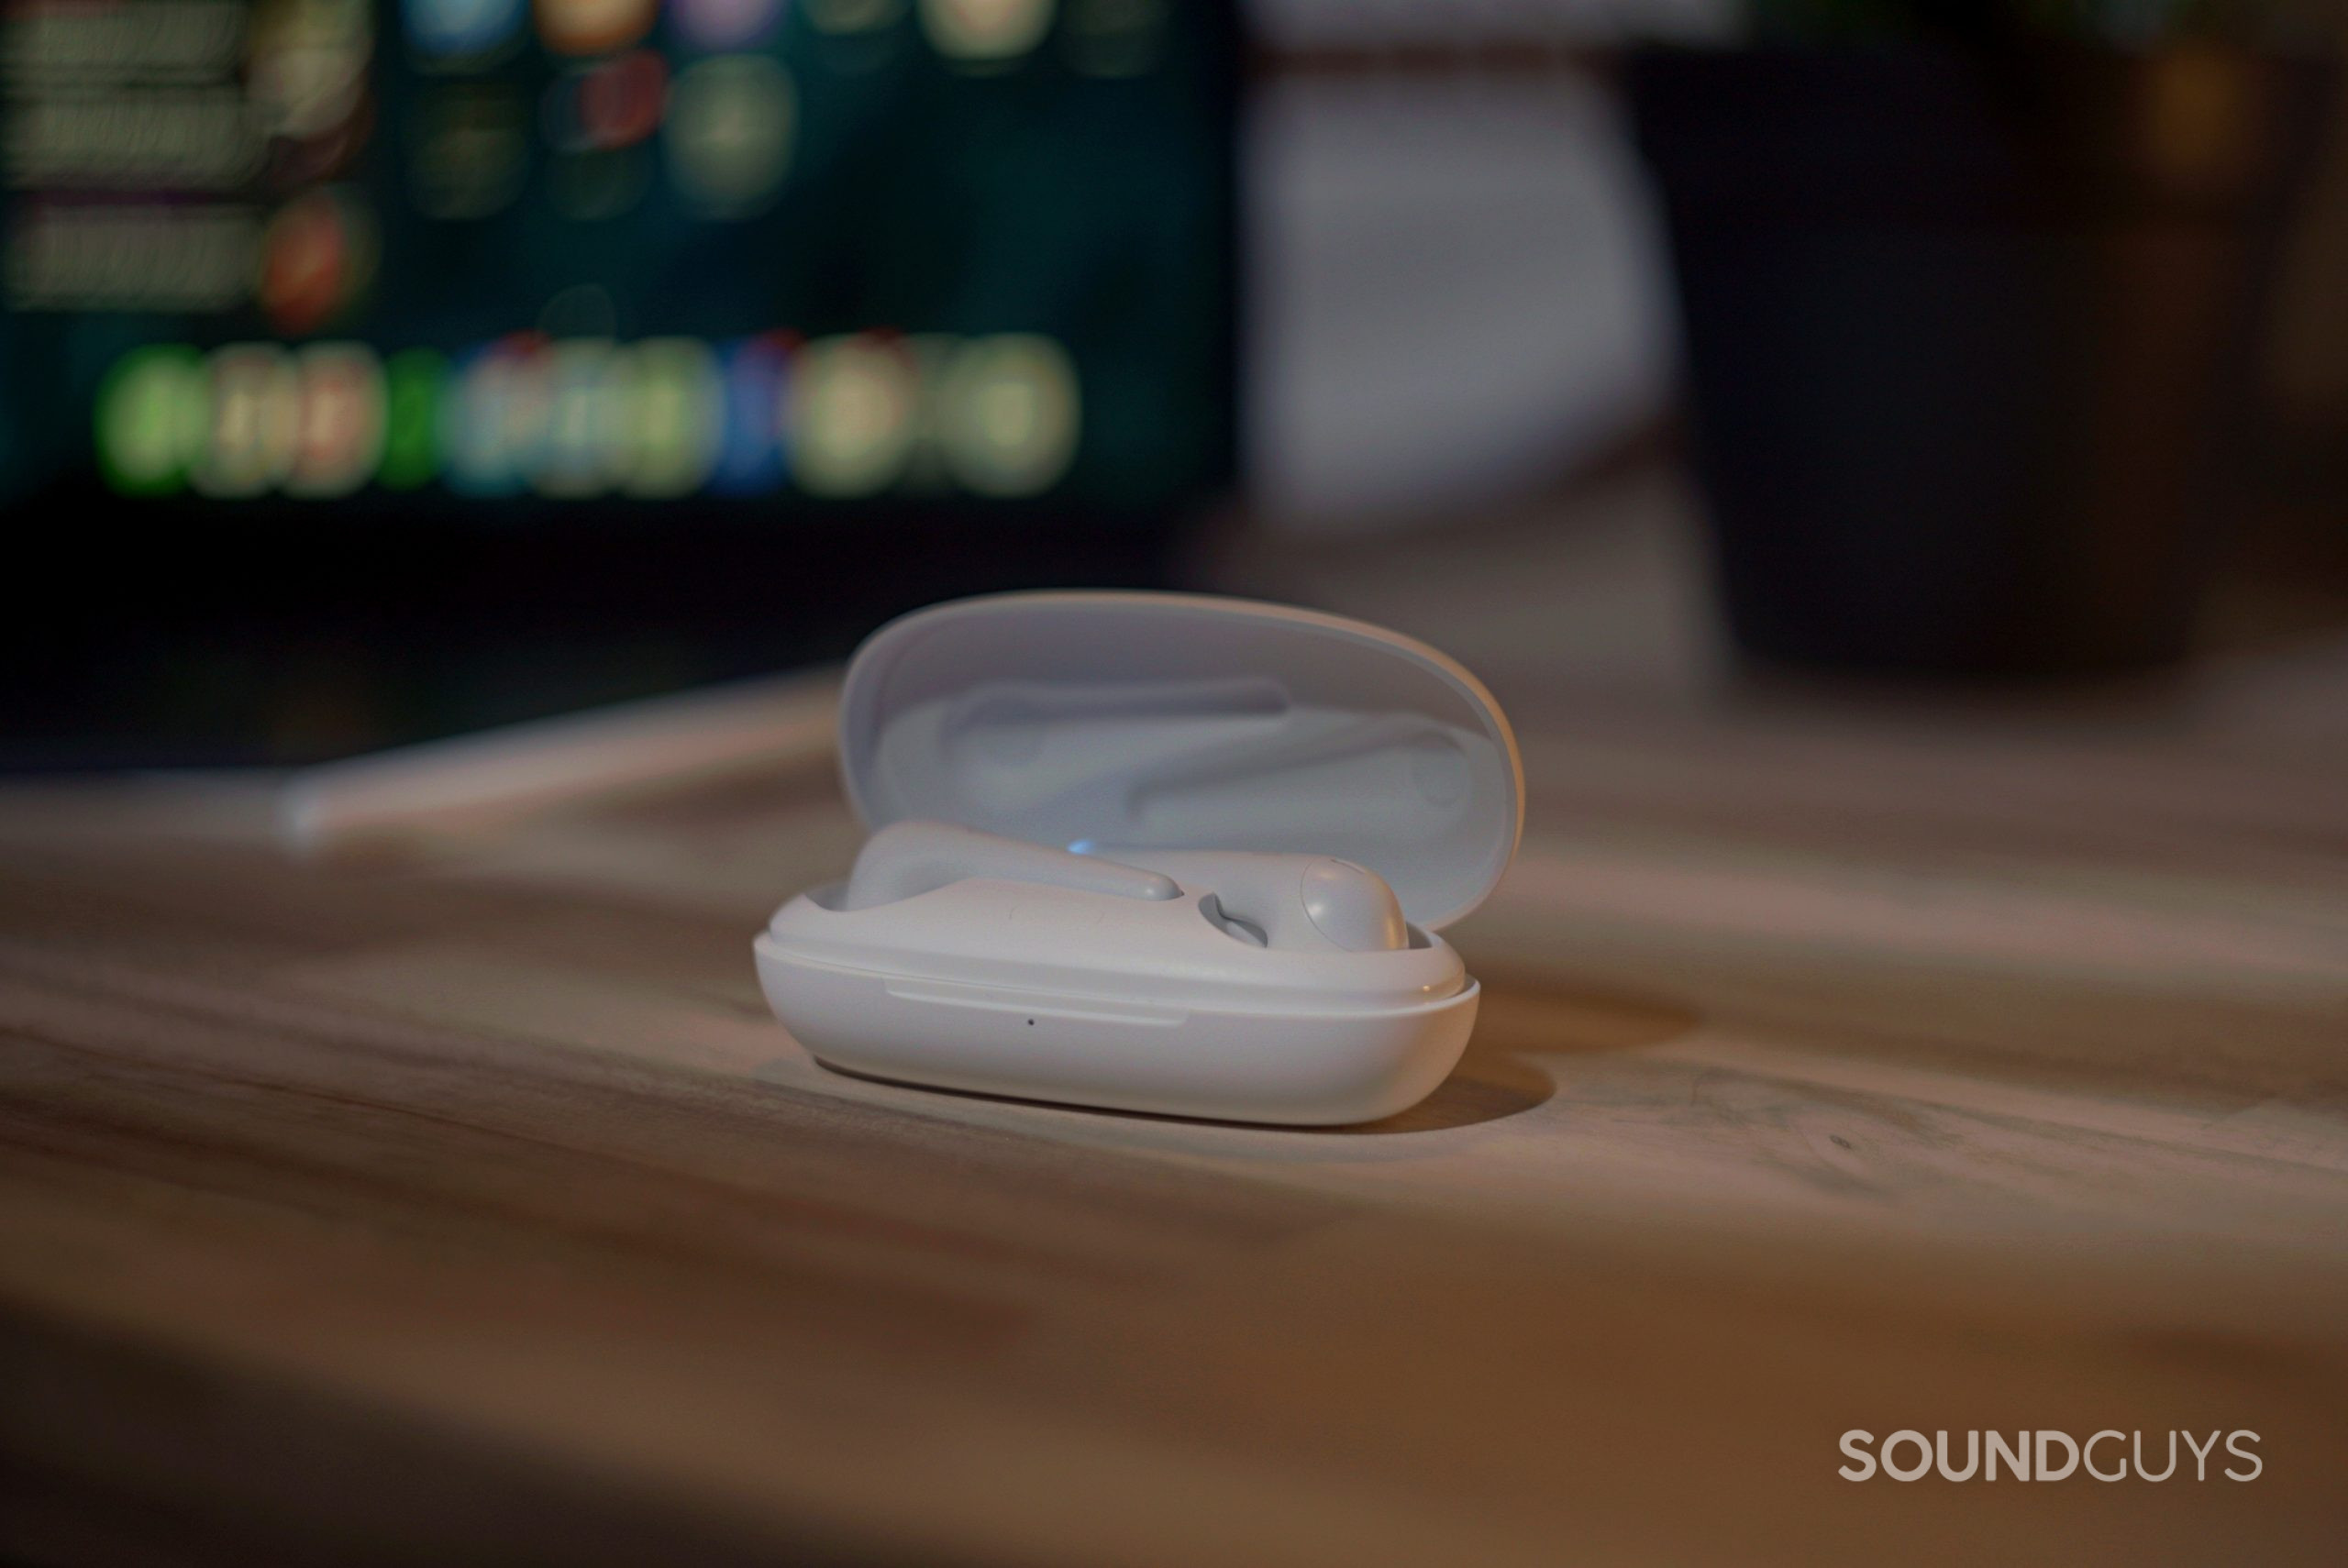 The 1MORE Comfobuds Pro cheap true wireless earbuds in the case.